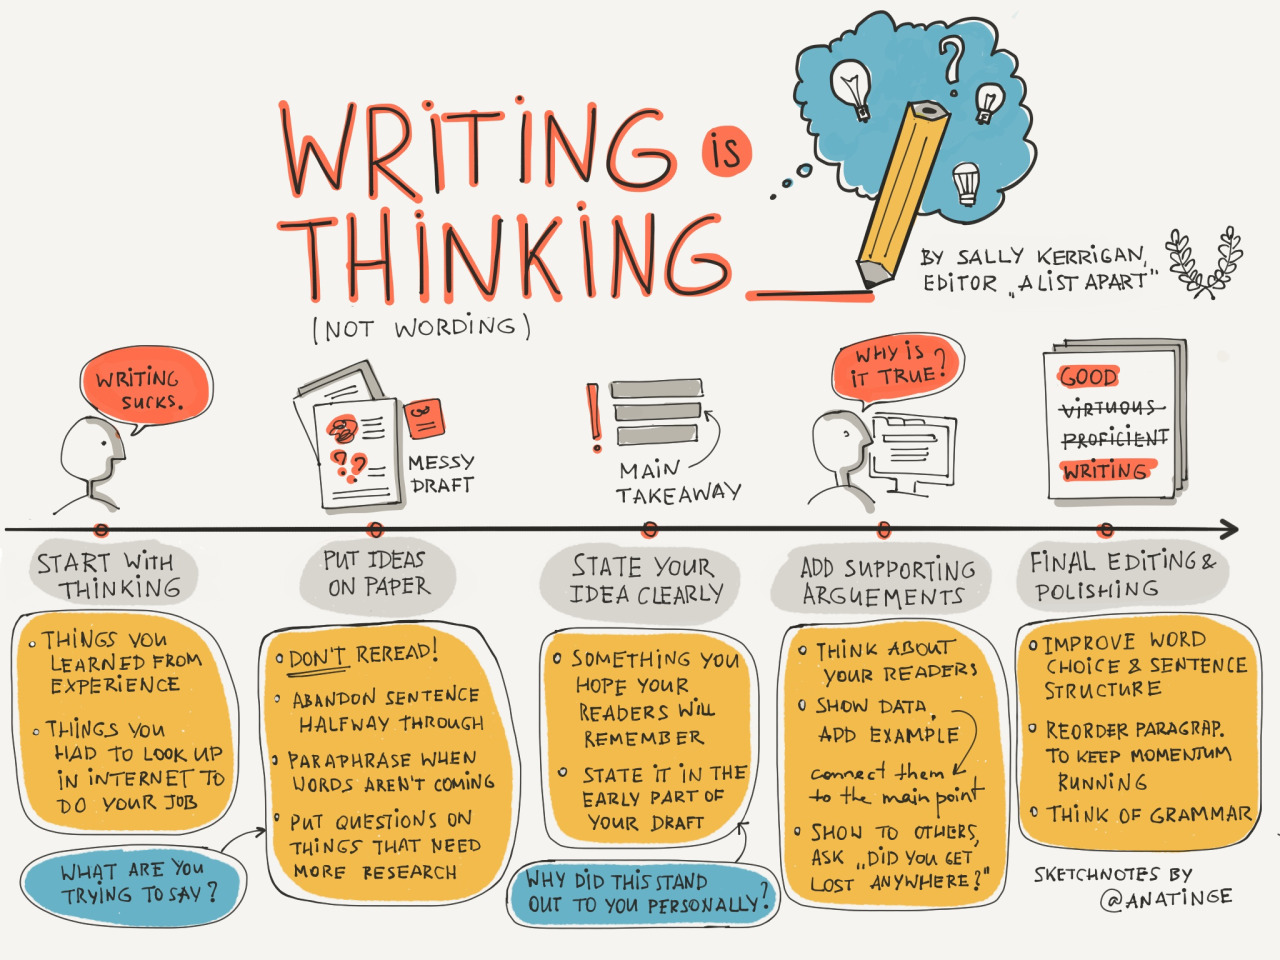 Writing isn’t really about wording. It’s about thinking. Sketchnotes from this cool article by Sally Kerrigan on overcoming writing blocks.
“When you write about your work, it makes all of us smarter for the effort, including you—because it forces...